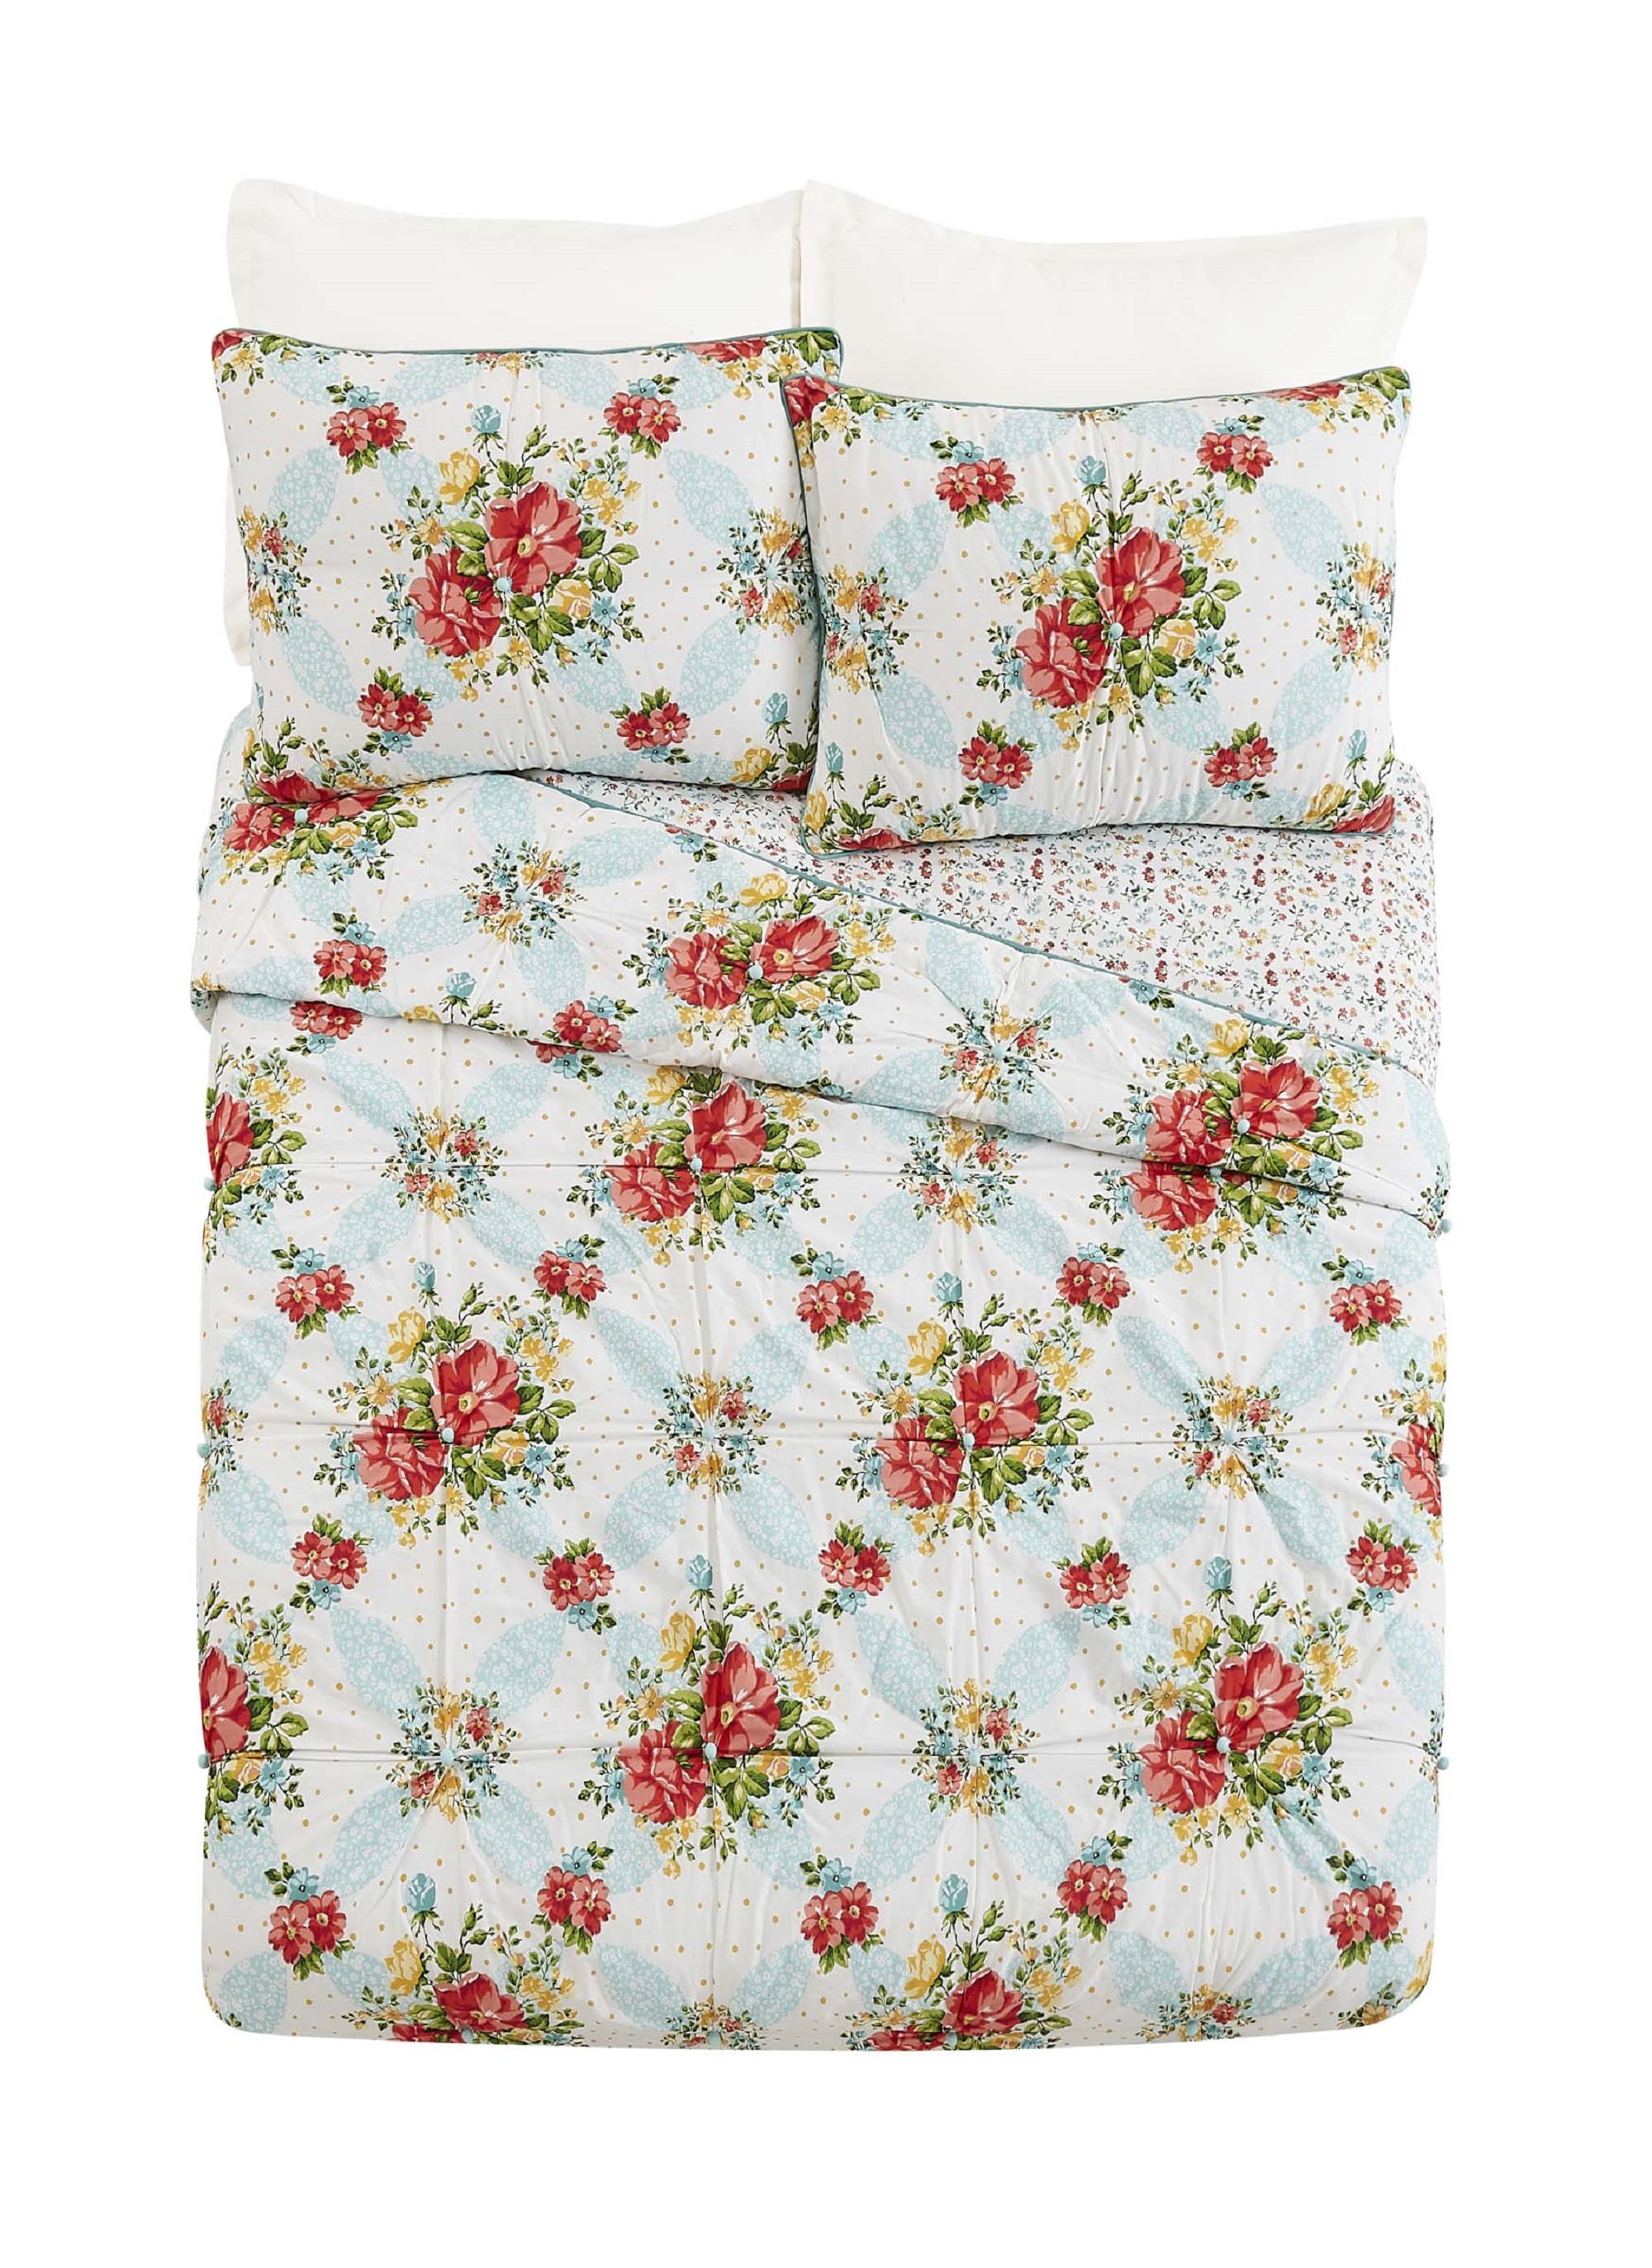 Pioneer Woman Cotton Heritage Floral Frontier Rose Kitchen Hand Towel Set of 2 